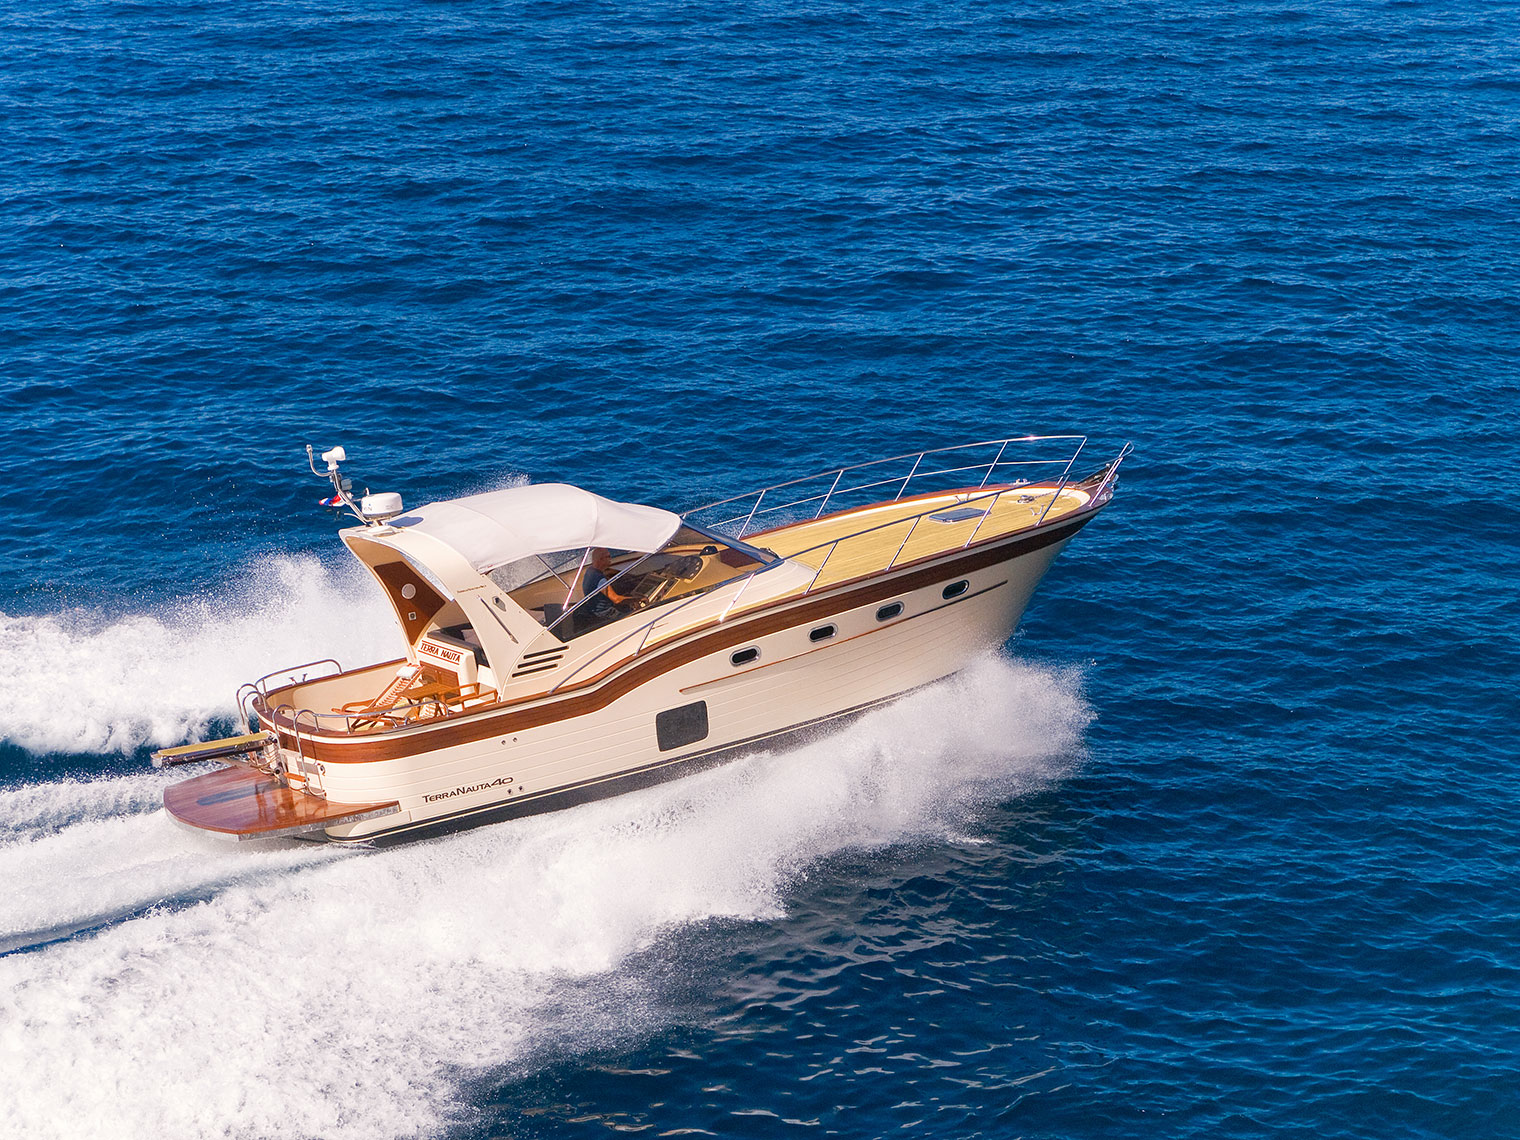 Three keywords used to describe this yacht are: reliability, comfort and beauty.